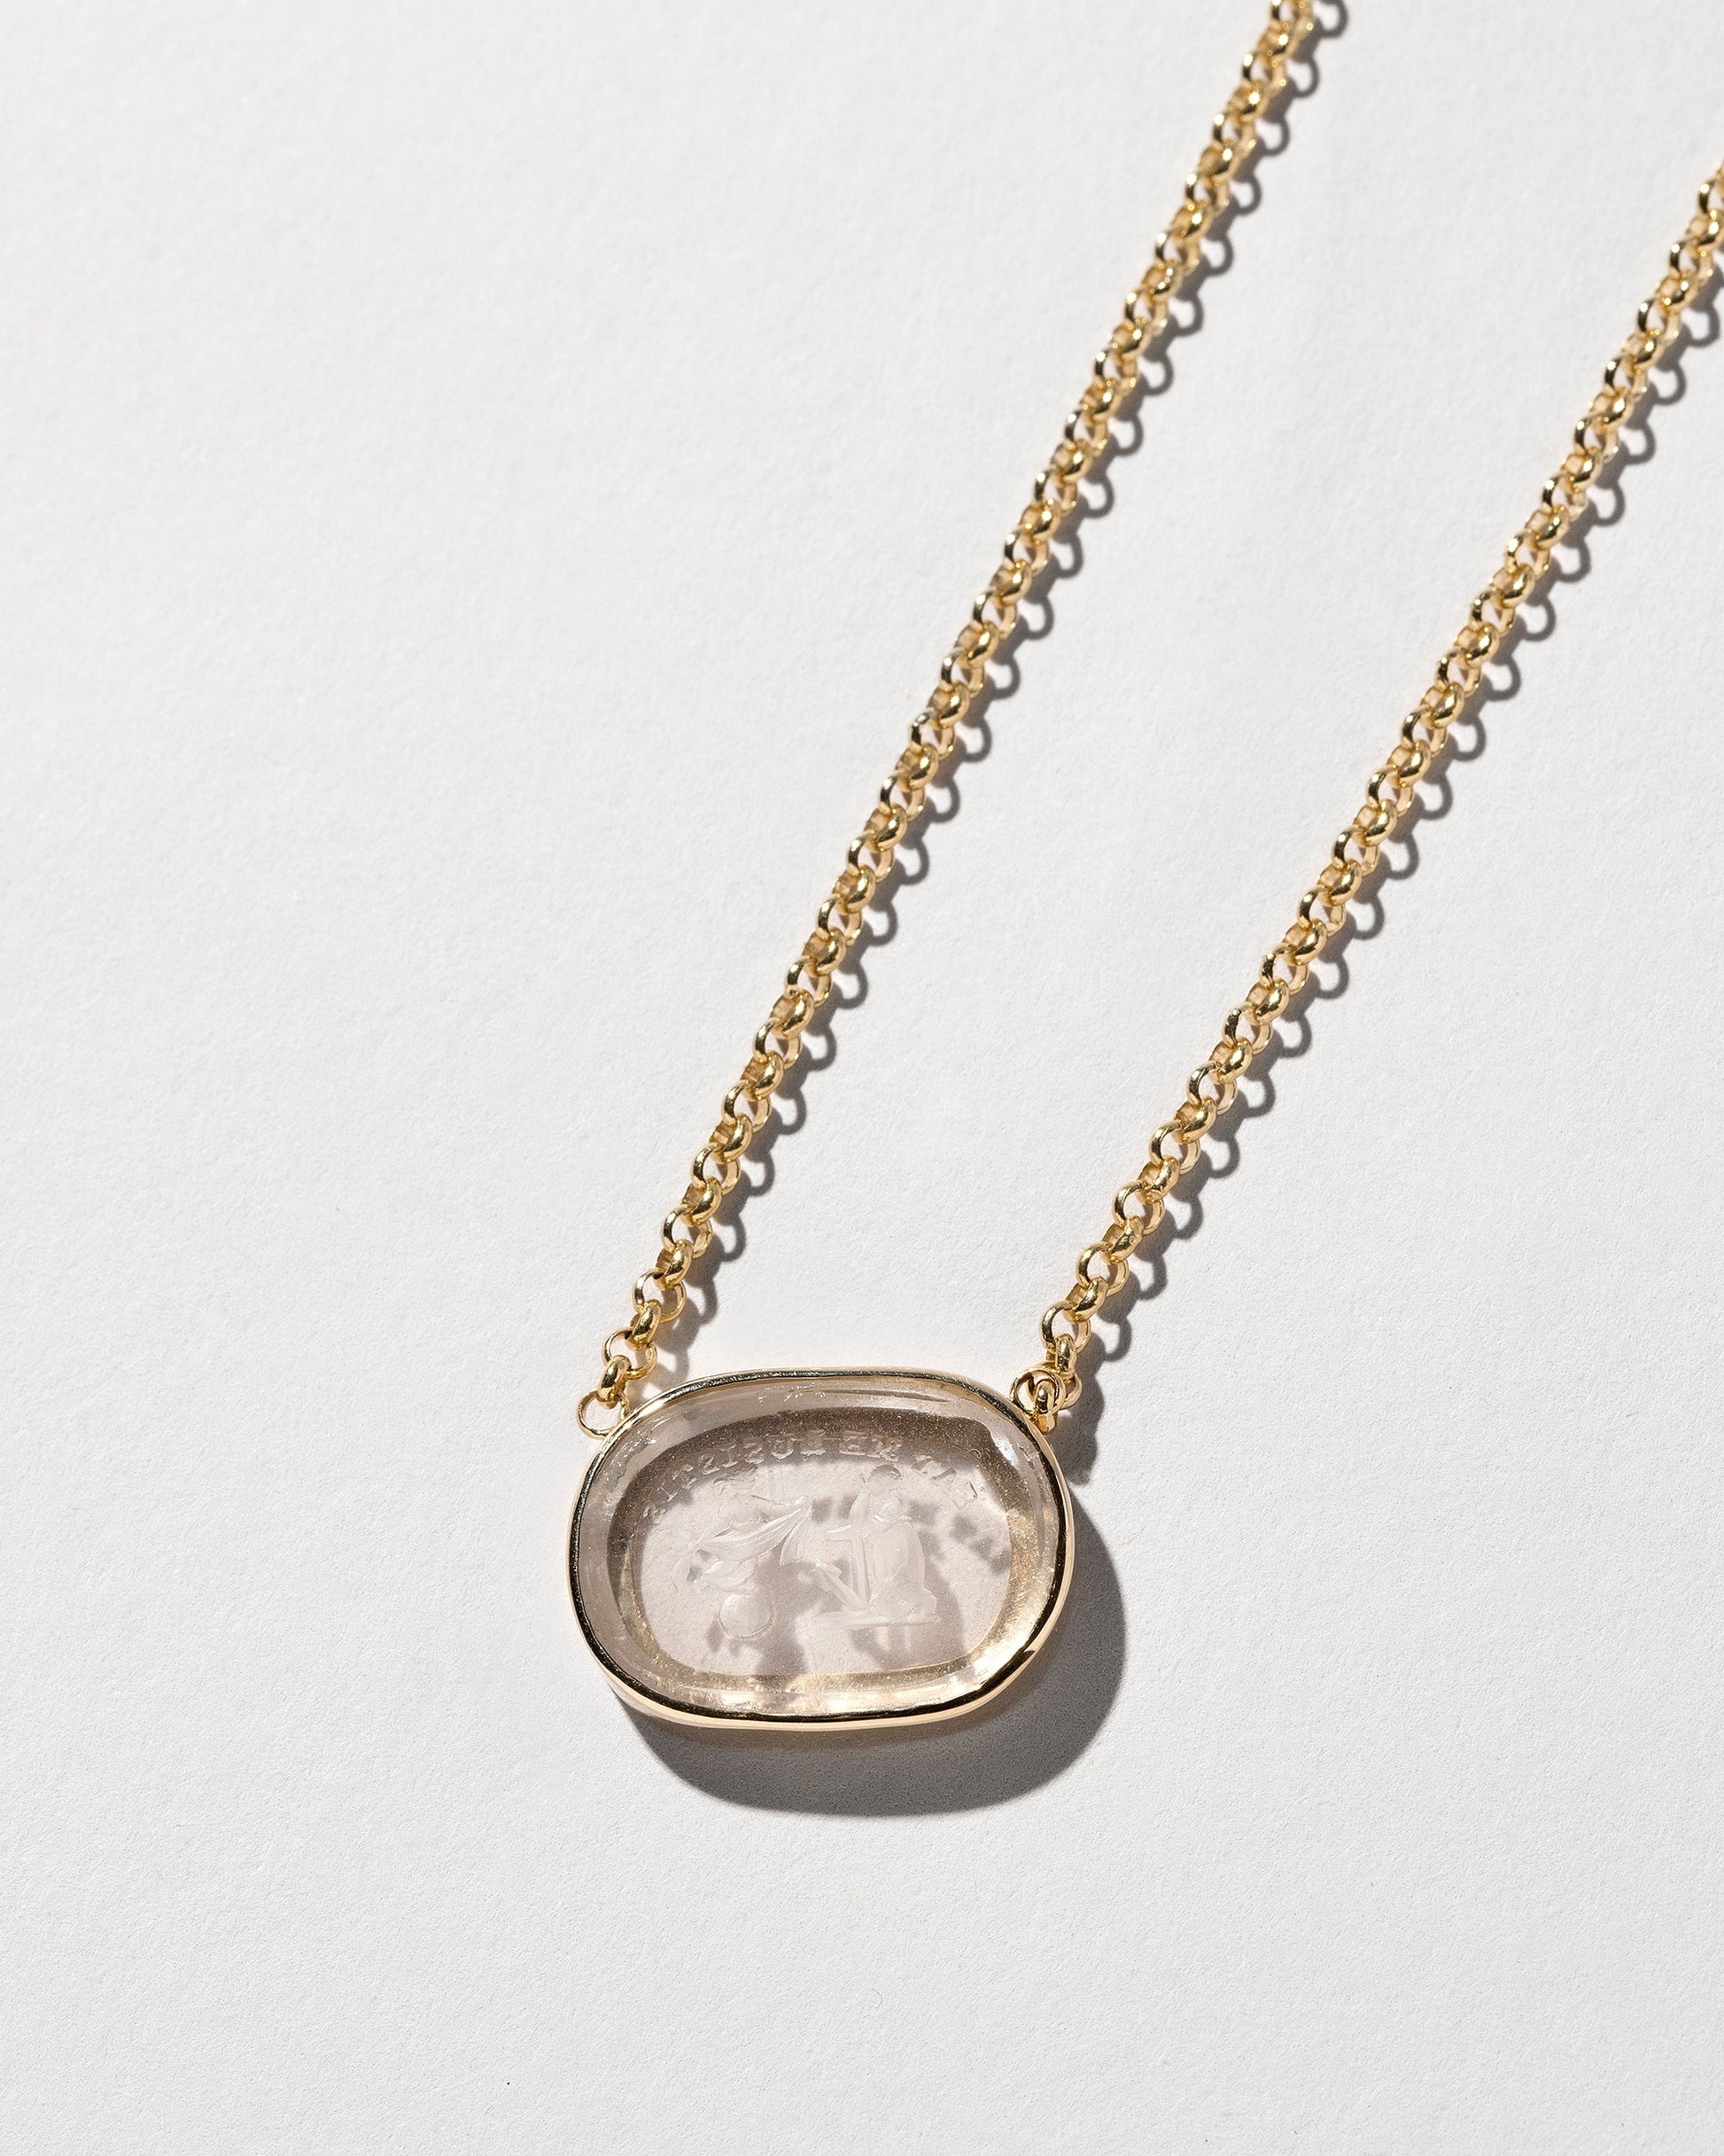  Independence Intaglio Seal Necklace on light color background.